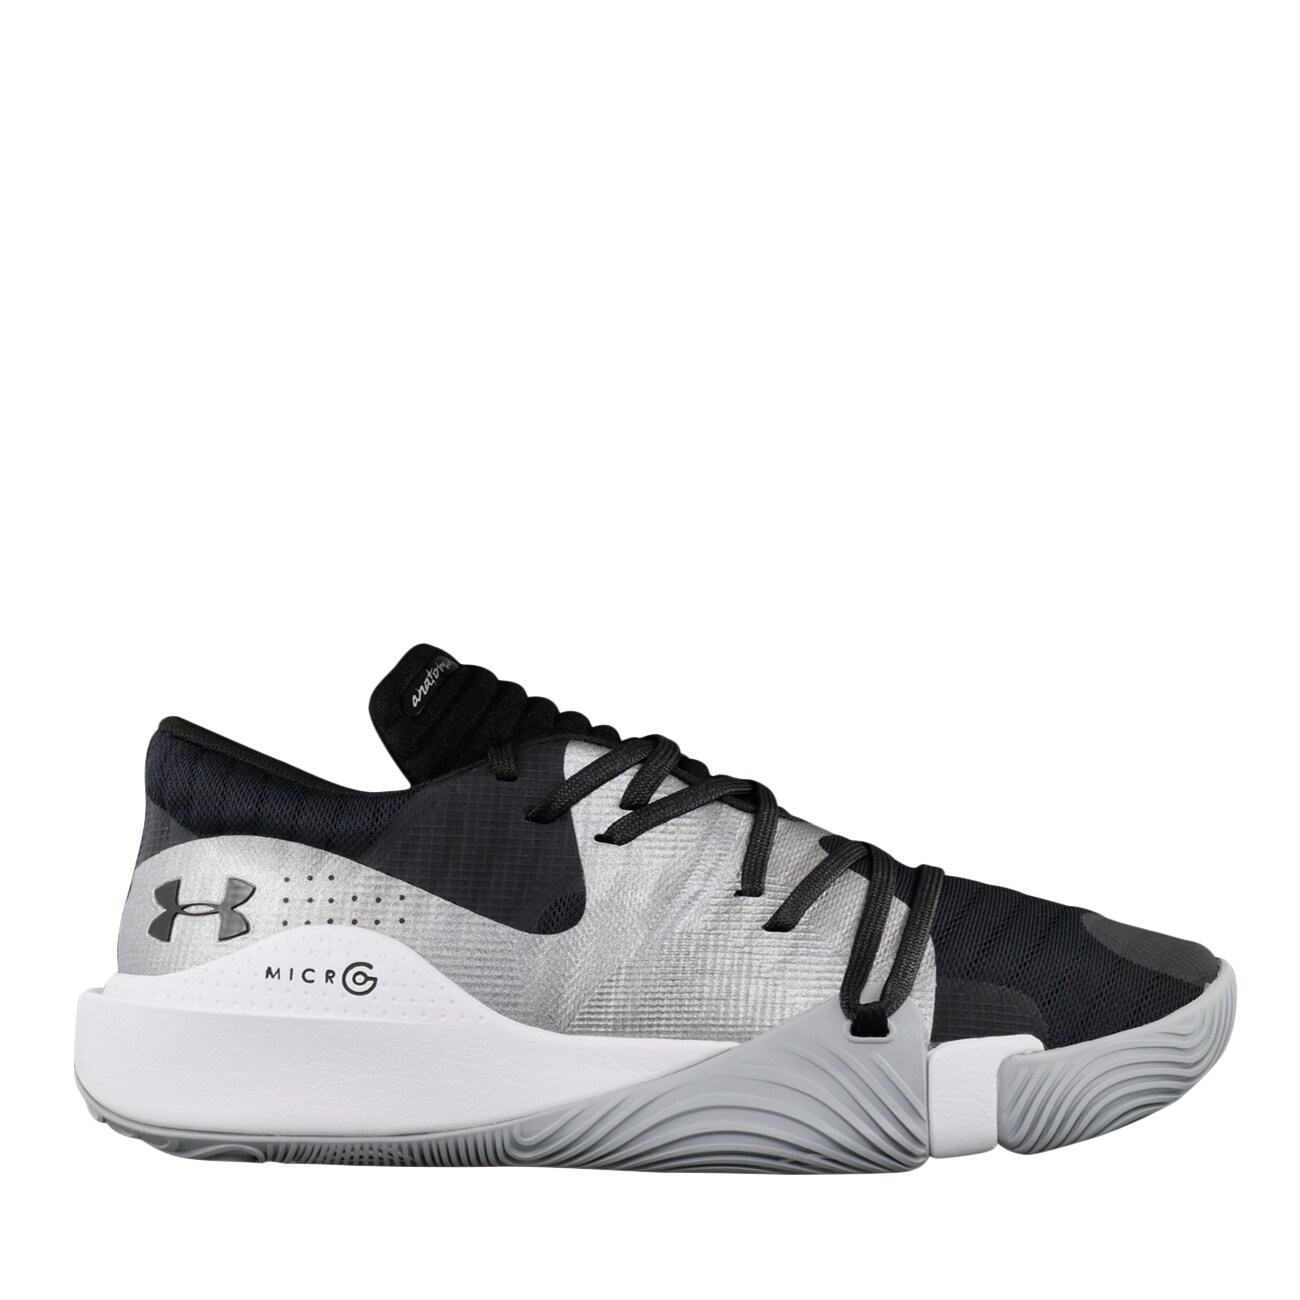 UNDER ARMOUR Men's Spawn Low Sneaker | The Shoe Company